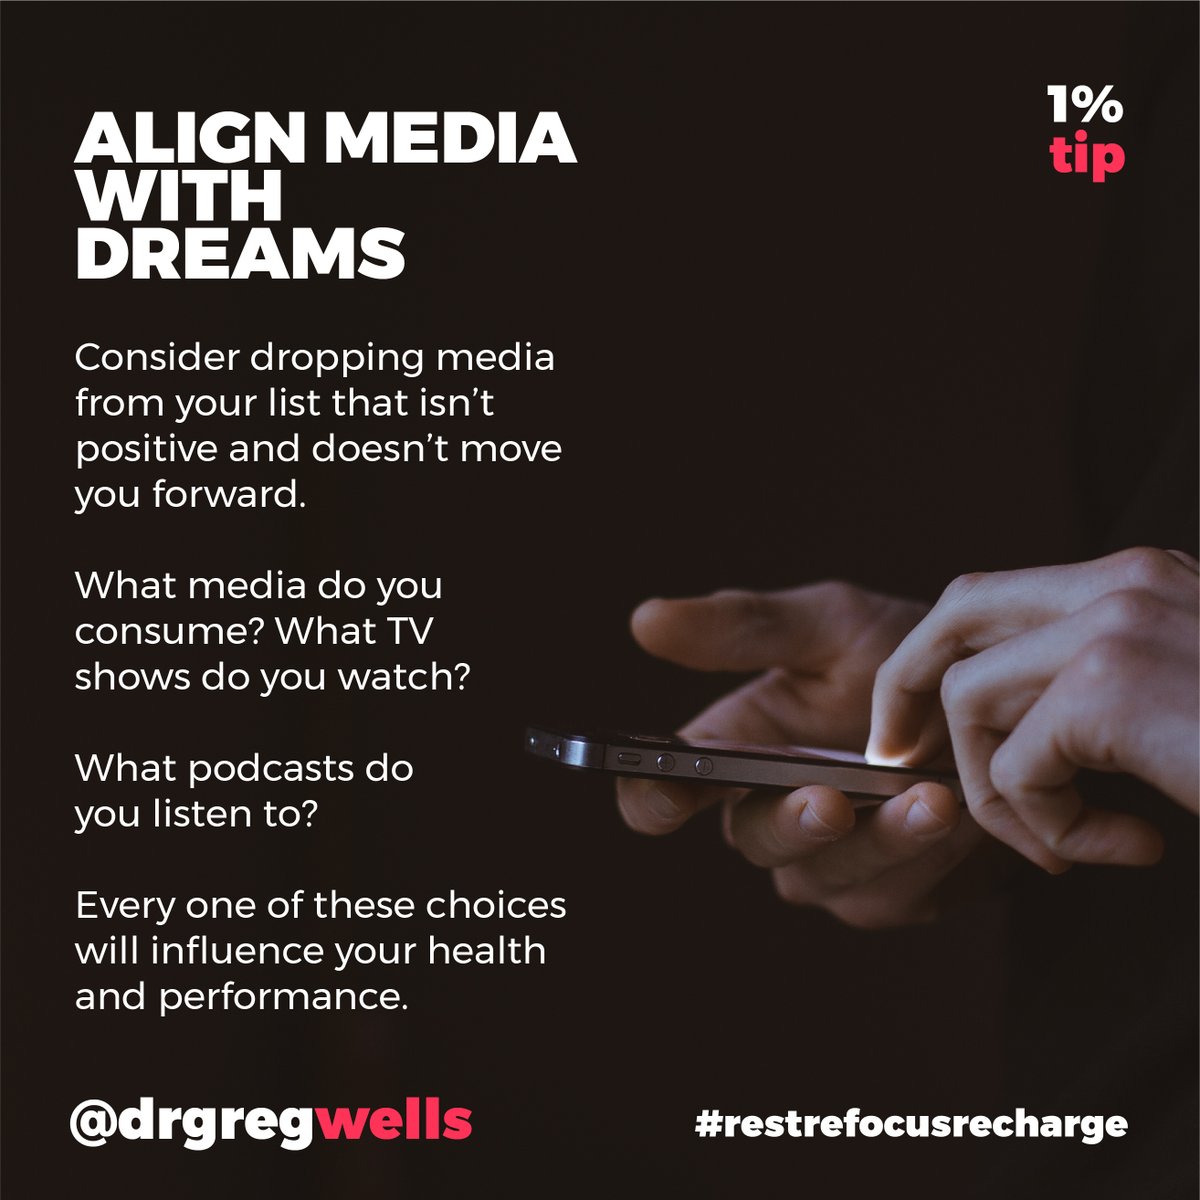 Rest Refocus Recharge Tactic: Align your media with your dreams

Have questions about how to focus better? Ask Dr Greg’s GPT: bit.ly/DrGregsGPT.

#restrefocusrecharge #sharpenyouredge #mentalhealth #breathe #wellness #mindset #brain #creativity #mindful #meditation